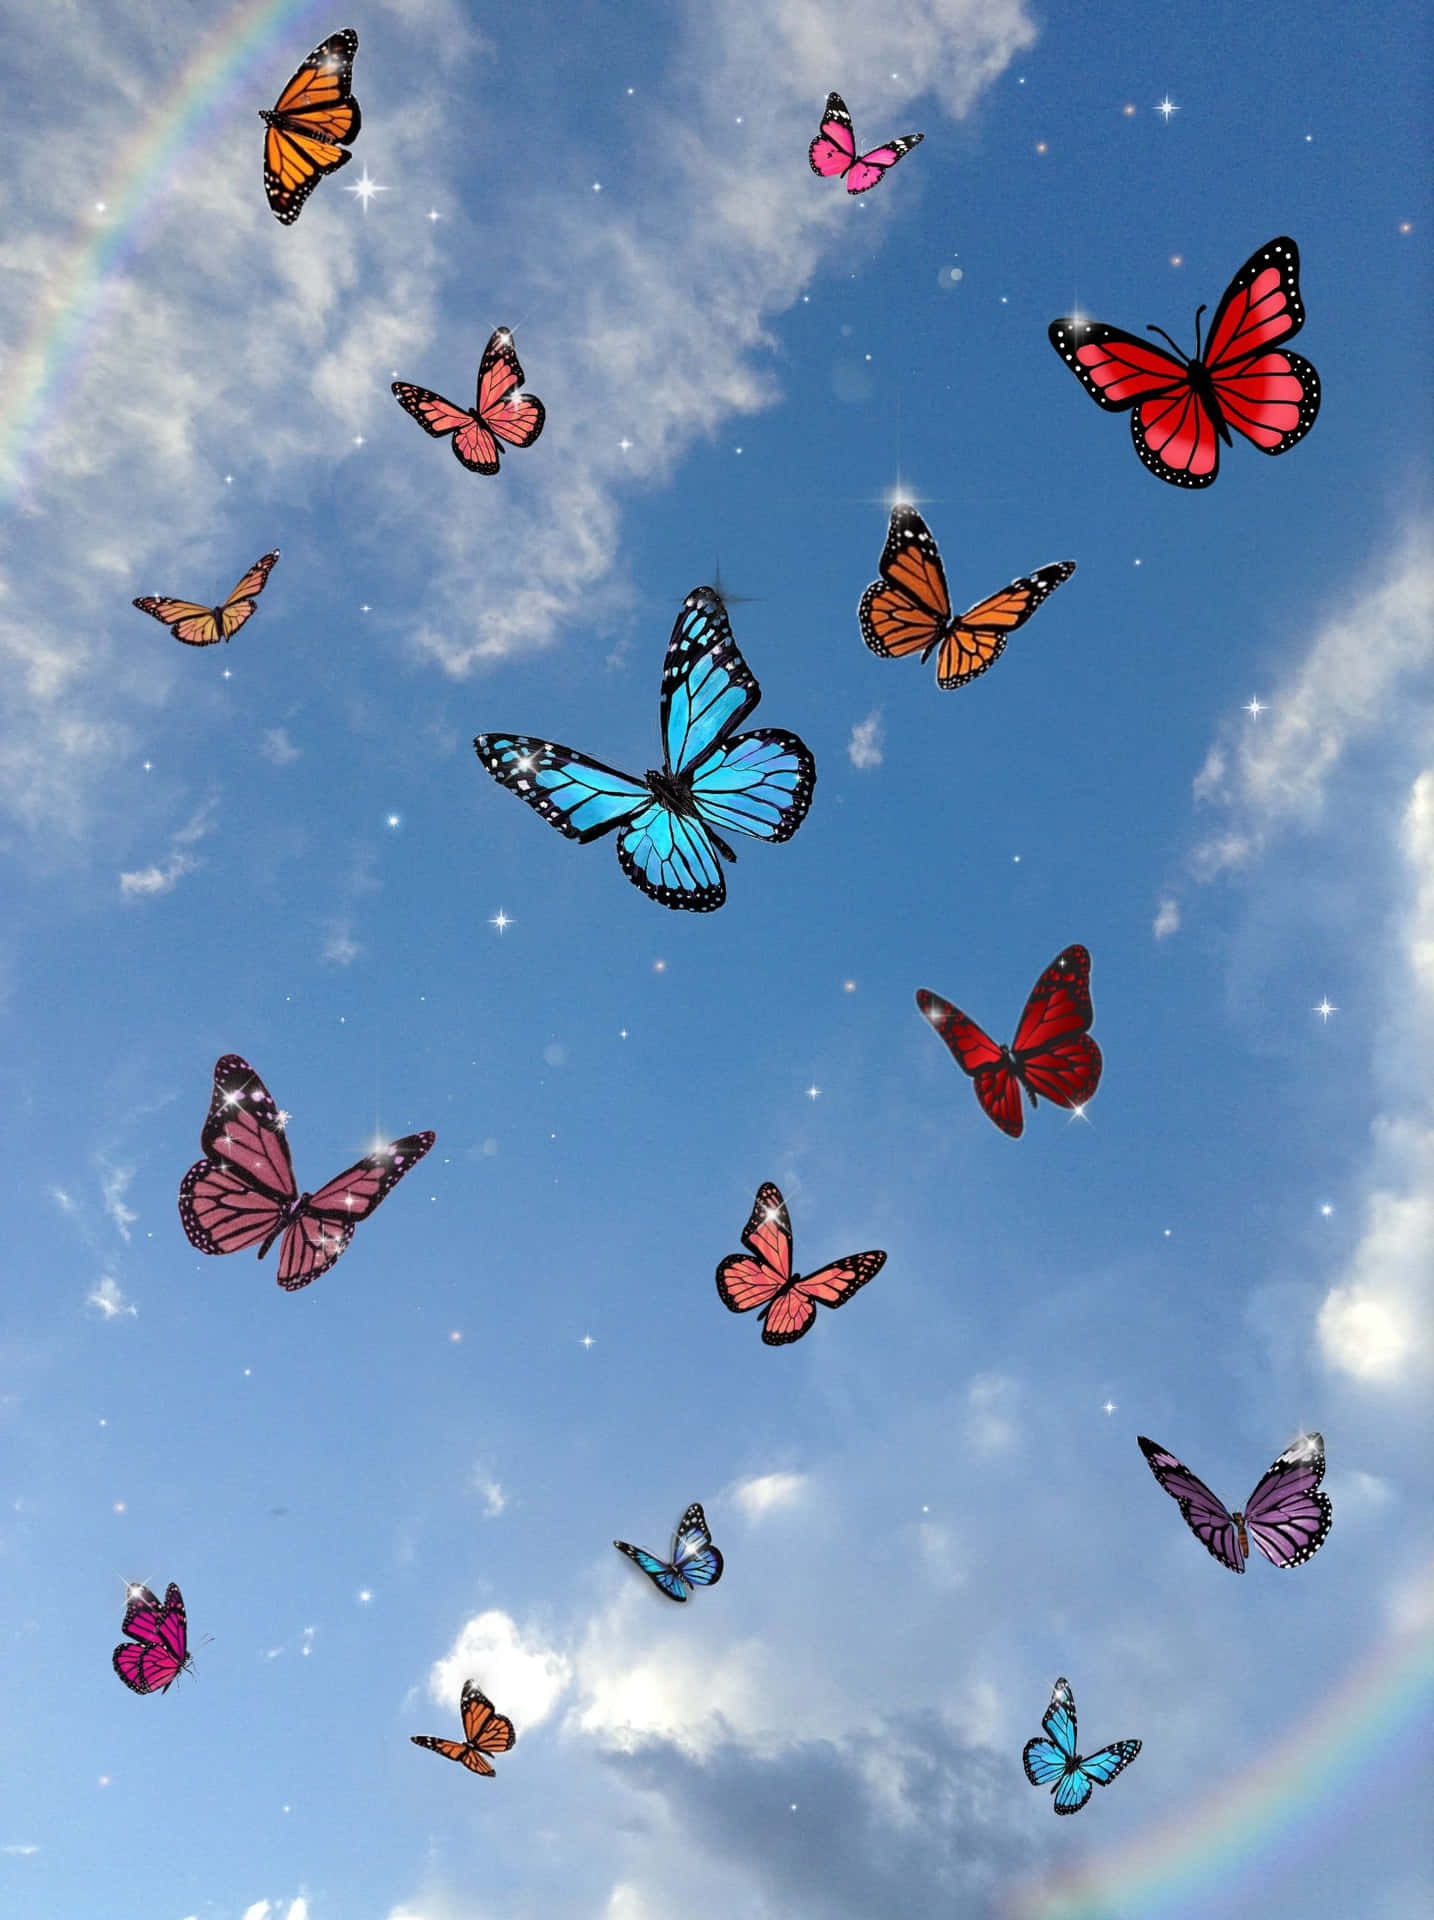 Download Colorful Glitter Butterfly Wallpaper | Wallpapers.com